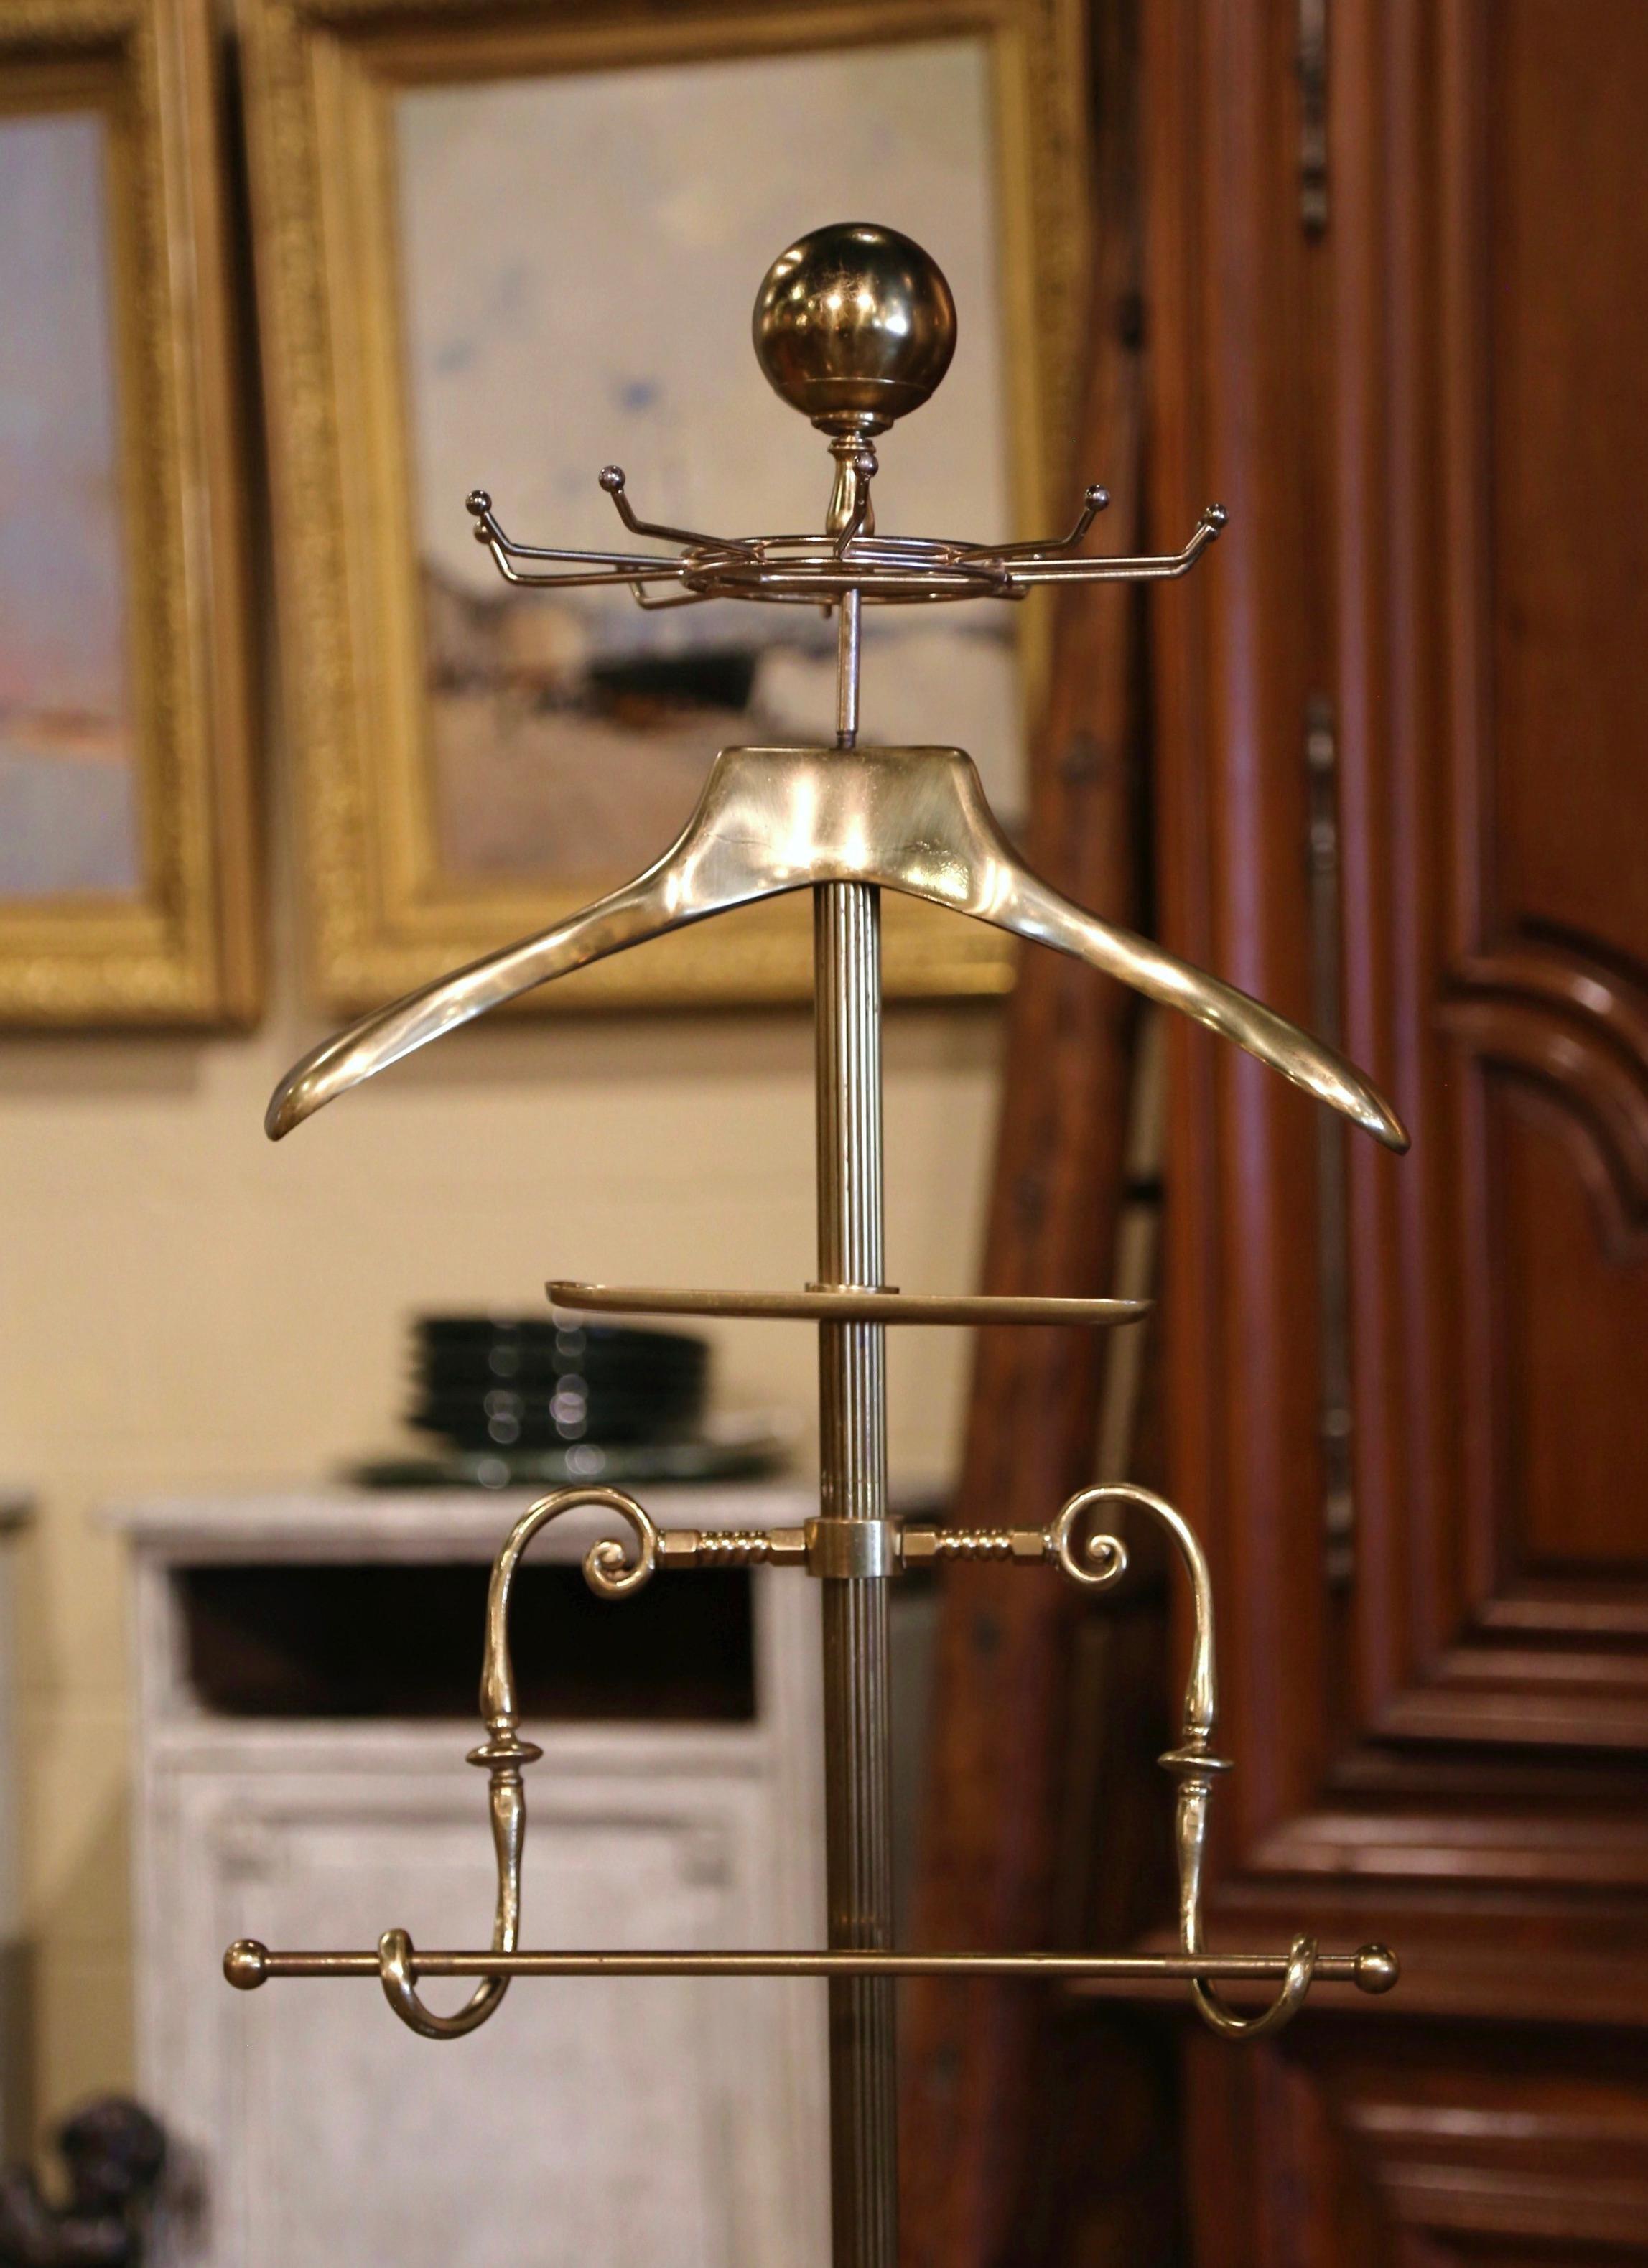 Art Deco Early 20th Century French Gilt Brass Jacket Hanger Bathroom Coat Stand For Sale